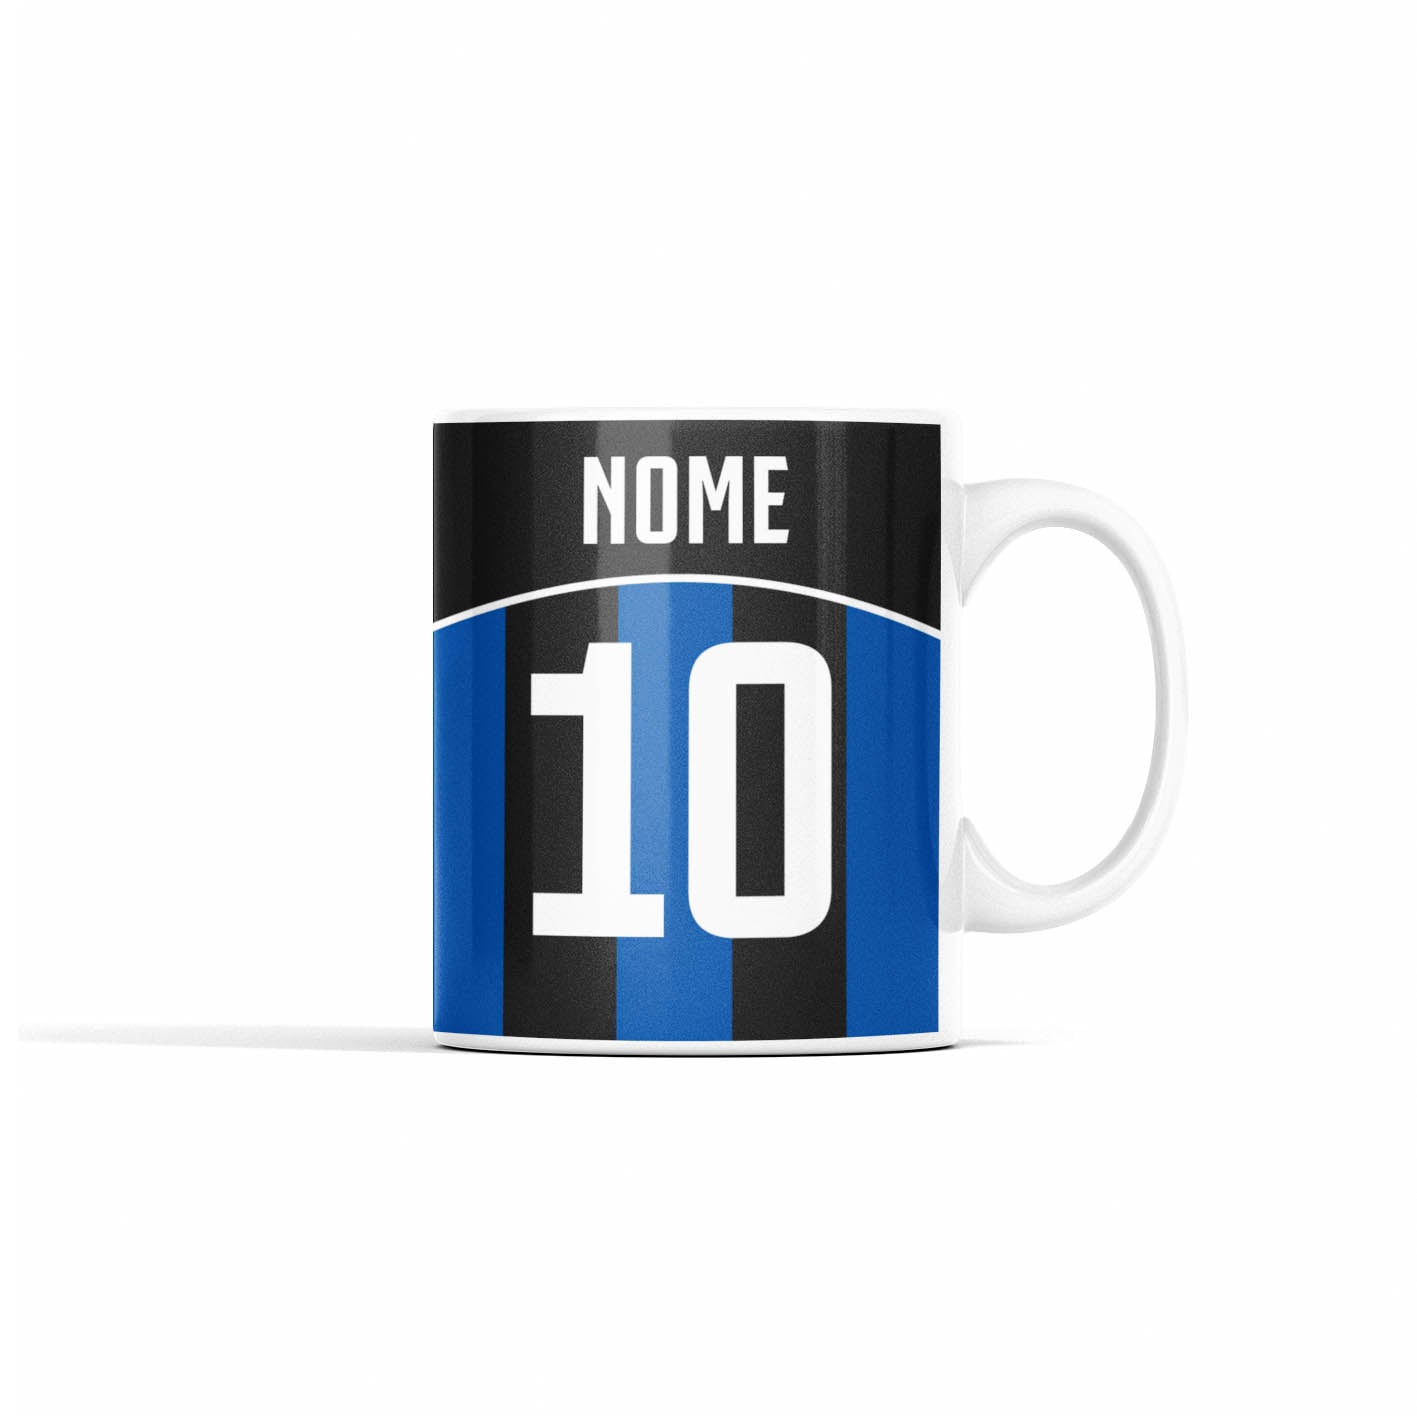 Inter mug personalized with name and number 